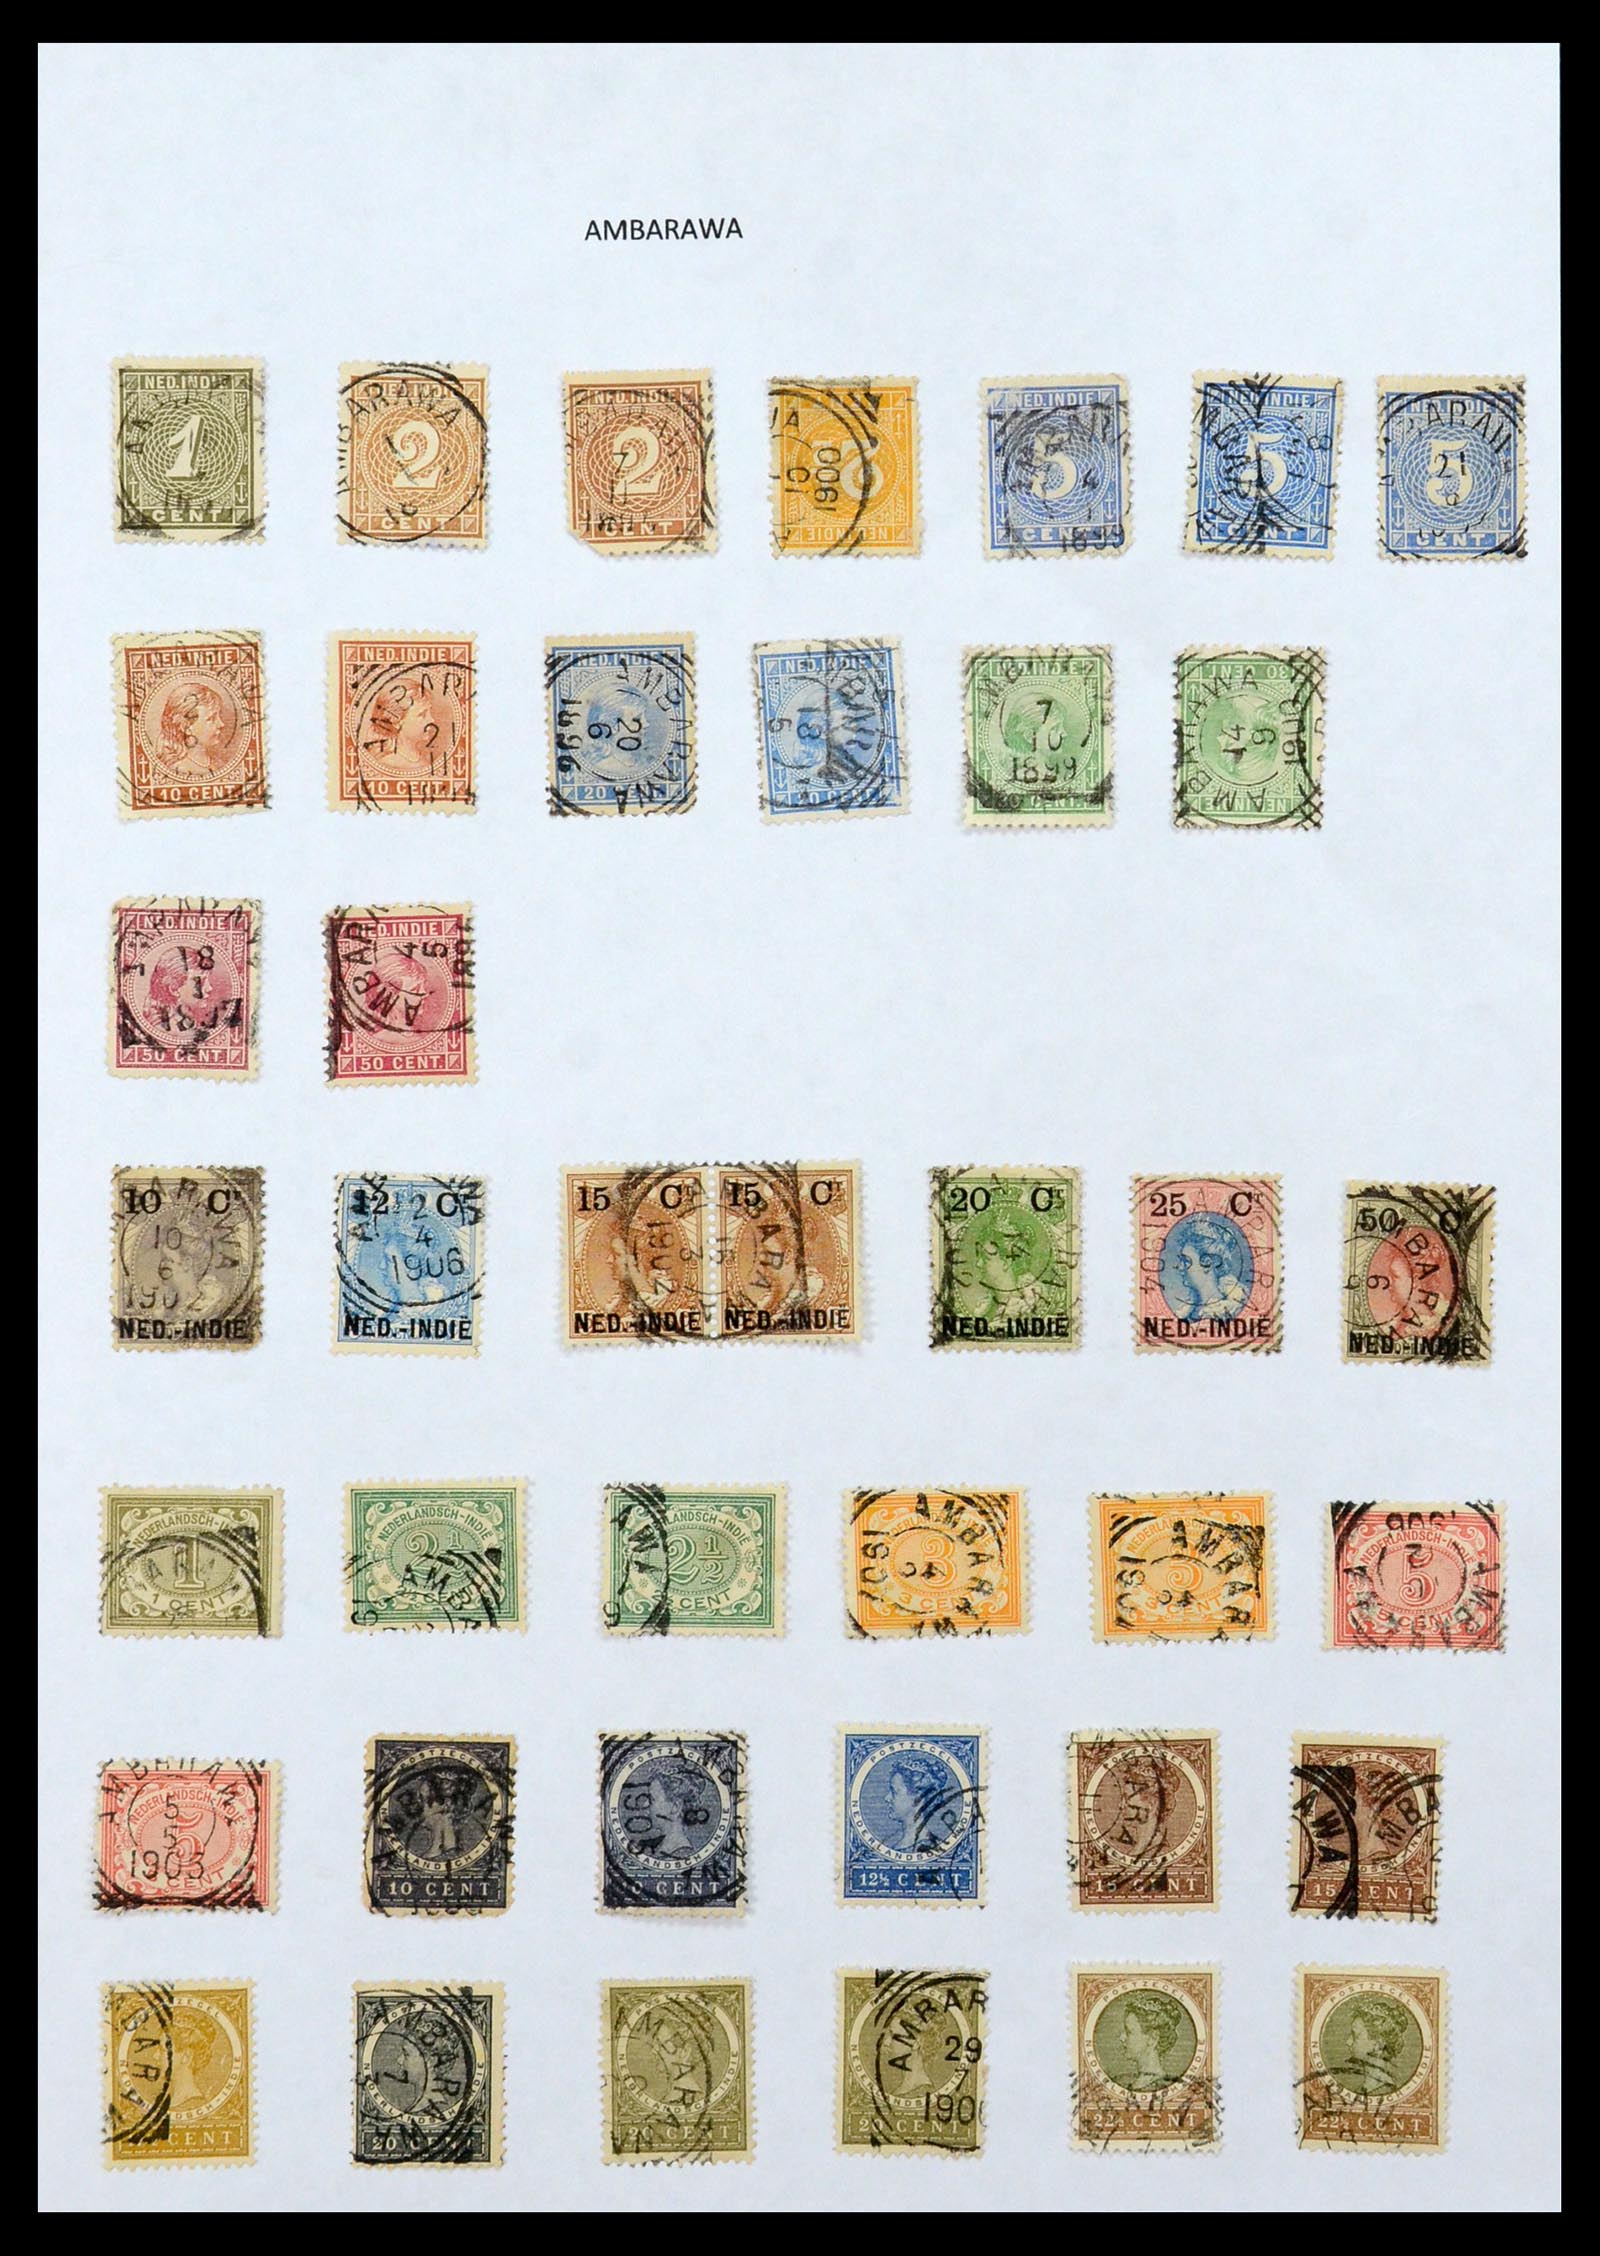 36432 001 - Stamp collection 36432 Dutch east Indies square cancels.